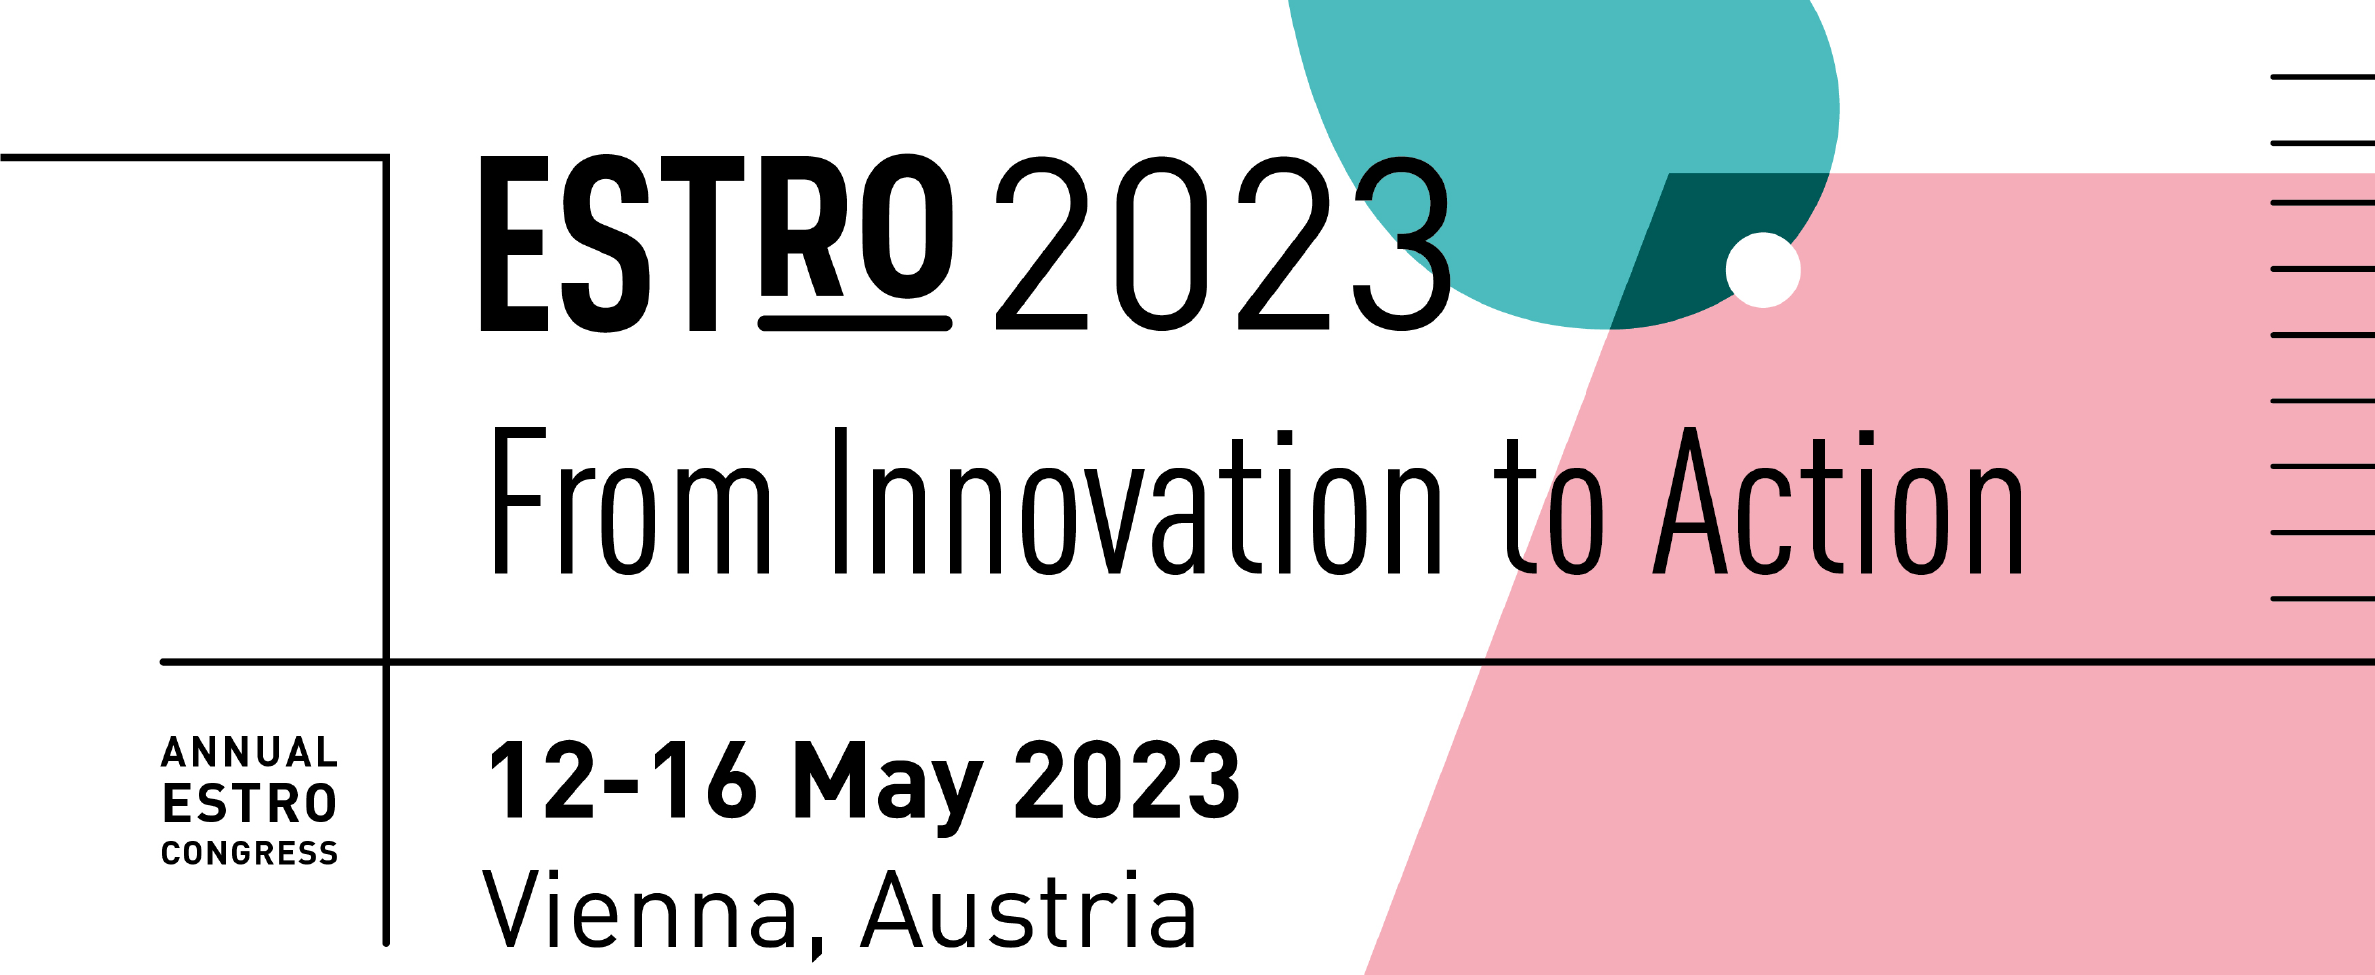 European Society for Radiotherapy and Oncology Congress - ESTRO 2023